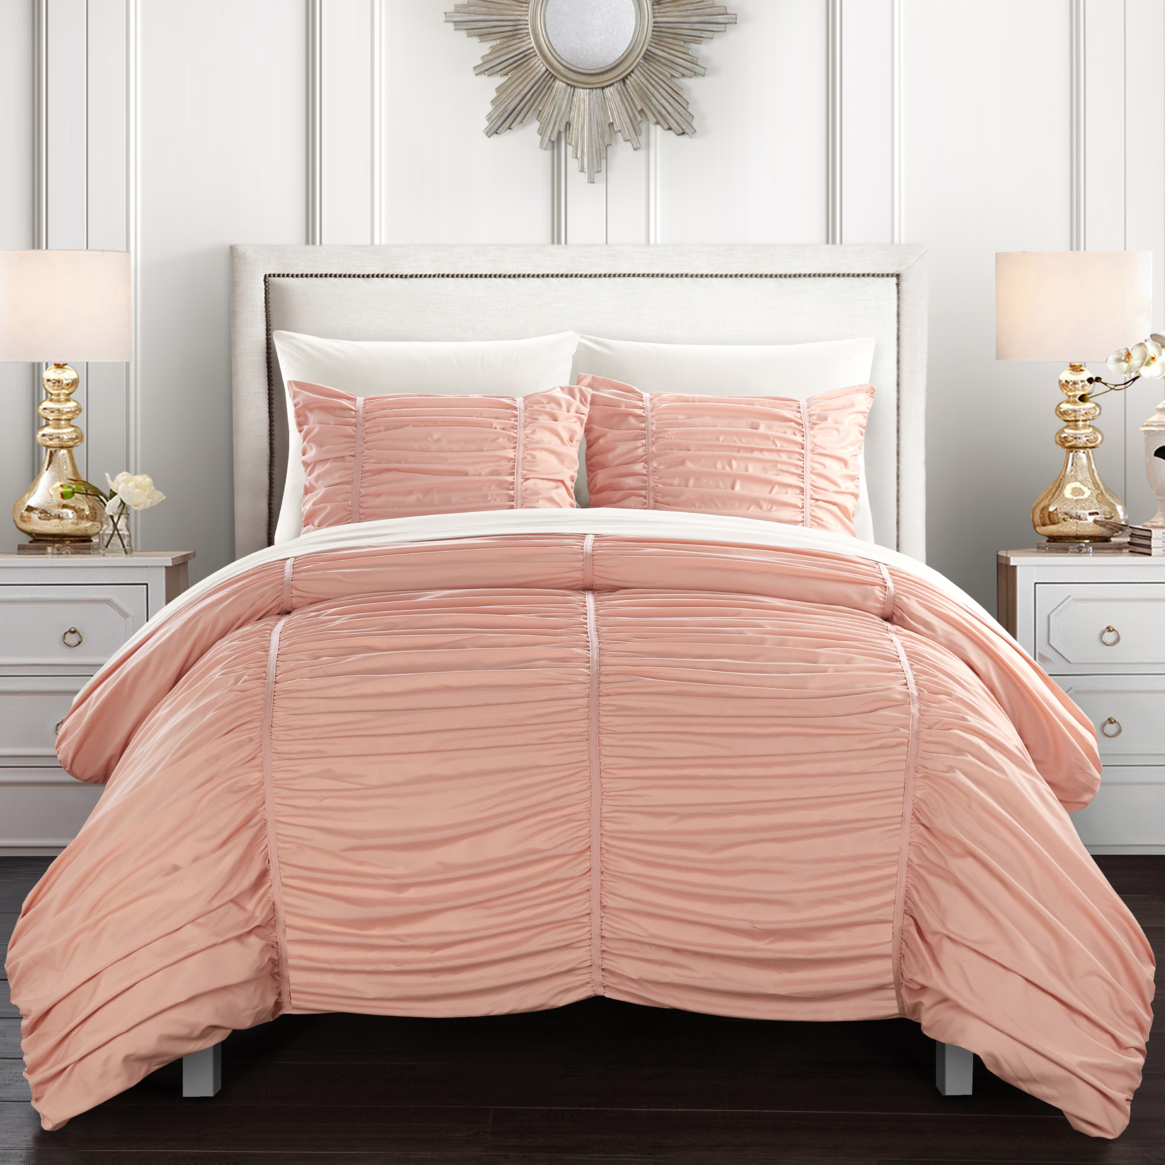 Kleia 7 Or 5 Piece Comforter Set Contemporary Striped Ruched Ruffled Design Bed In A Bag - Coral, Twin X-long